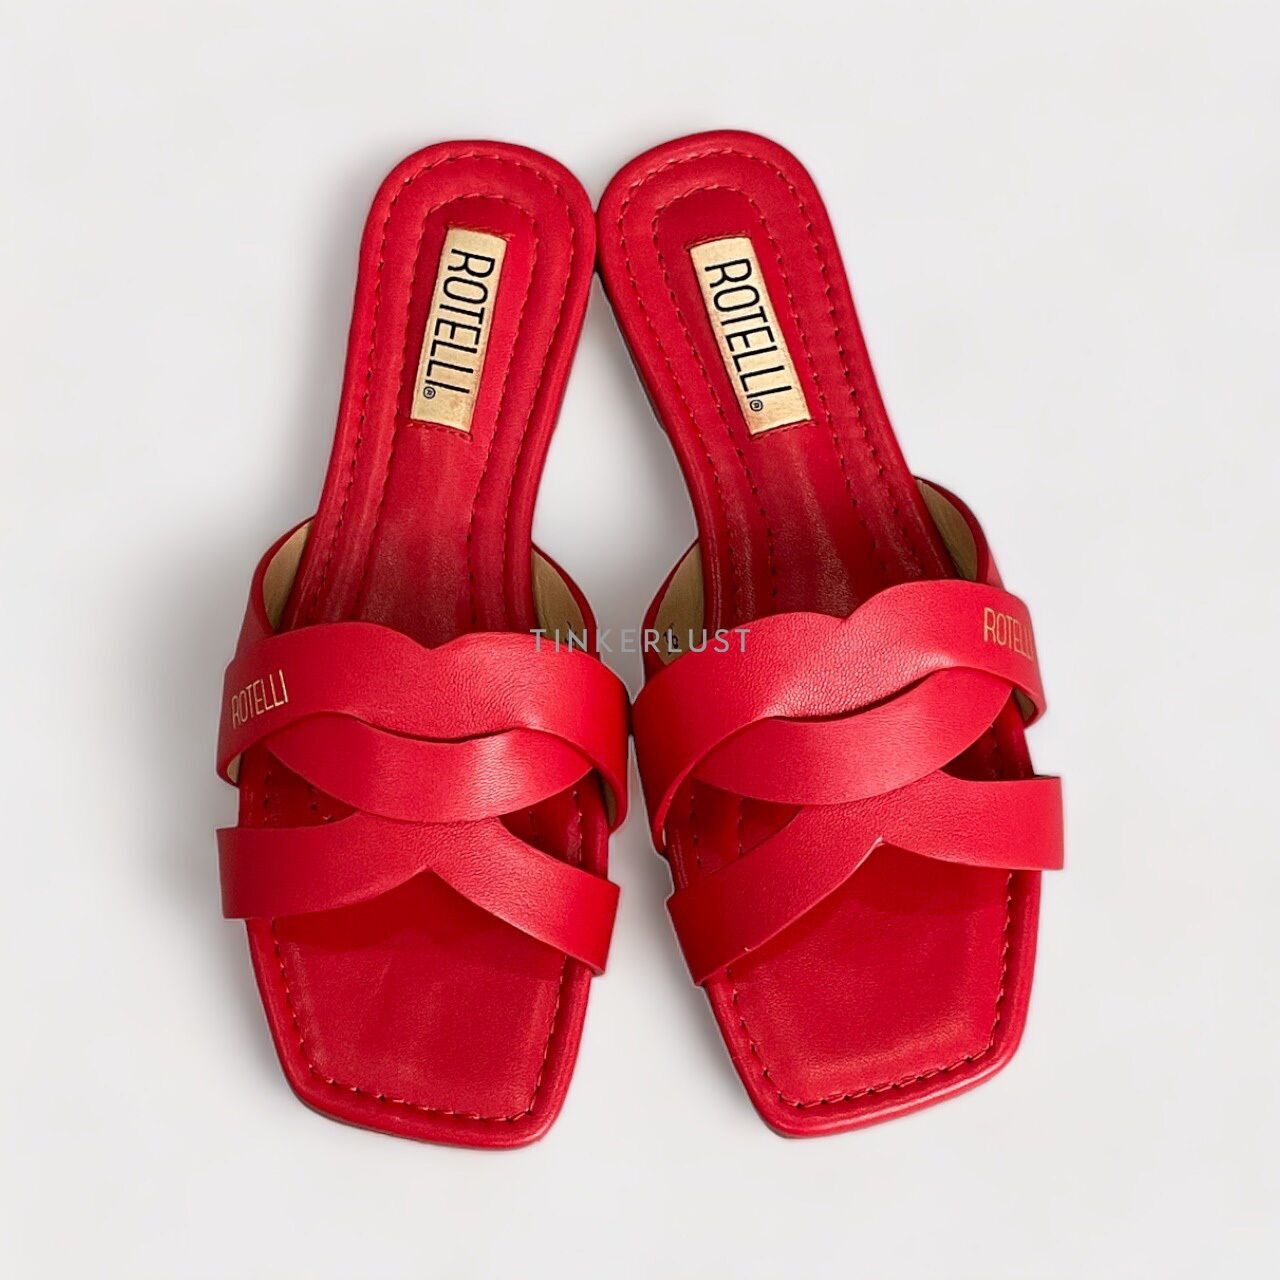 Rotelli Red Sandals